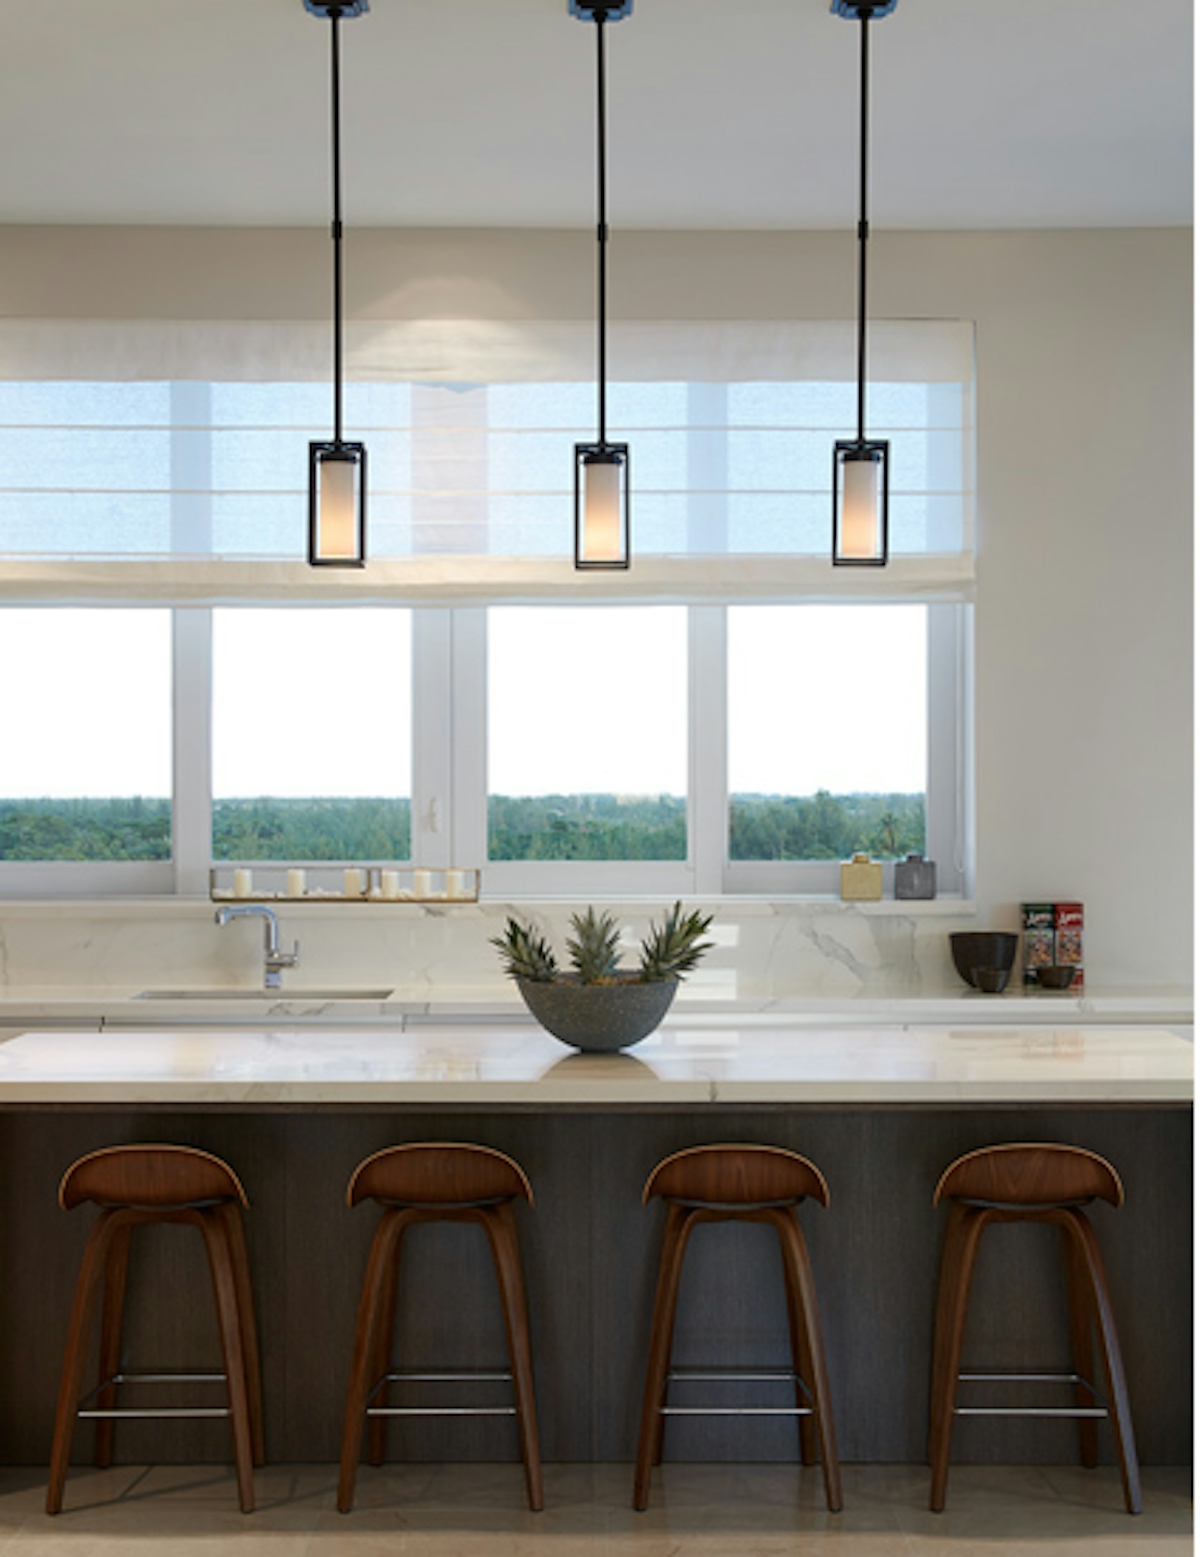 How To Declutter Your Home | Kitchen Interior by Finchatton | Read more in the LuxDeco.com Style Guide